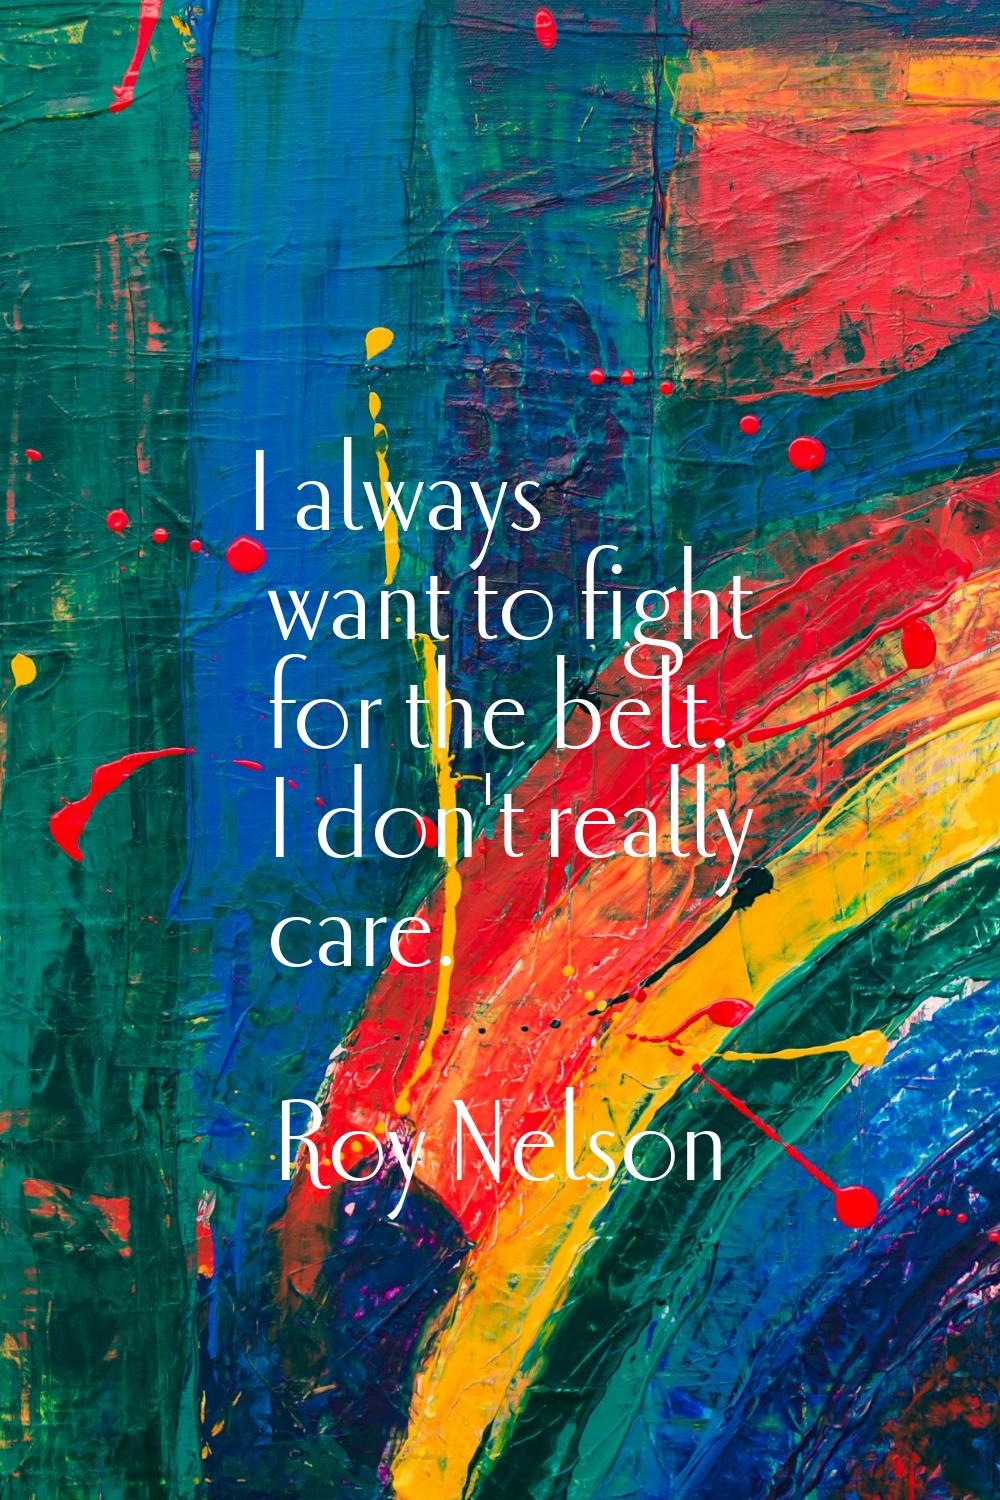 I always want to fight for the belt. I don't really care.